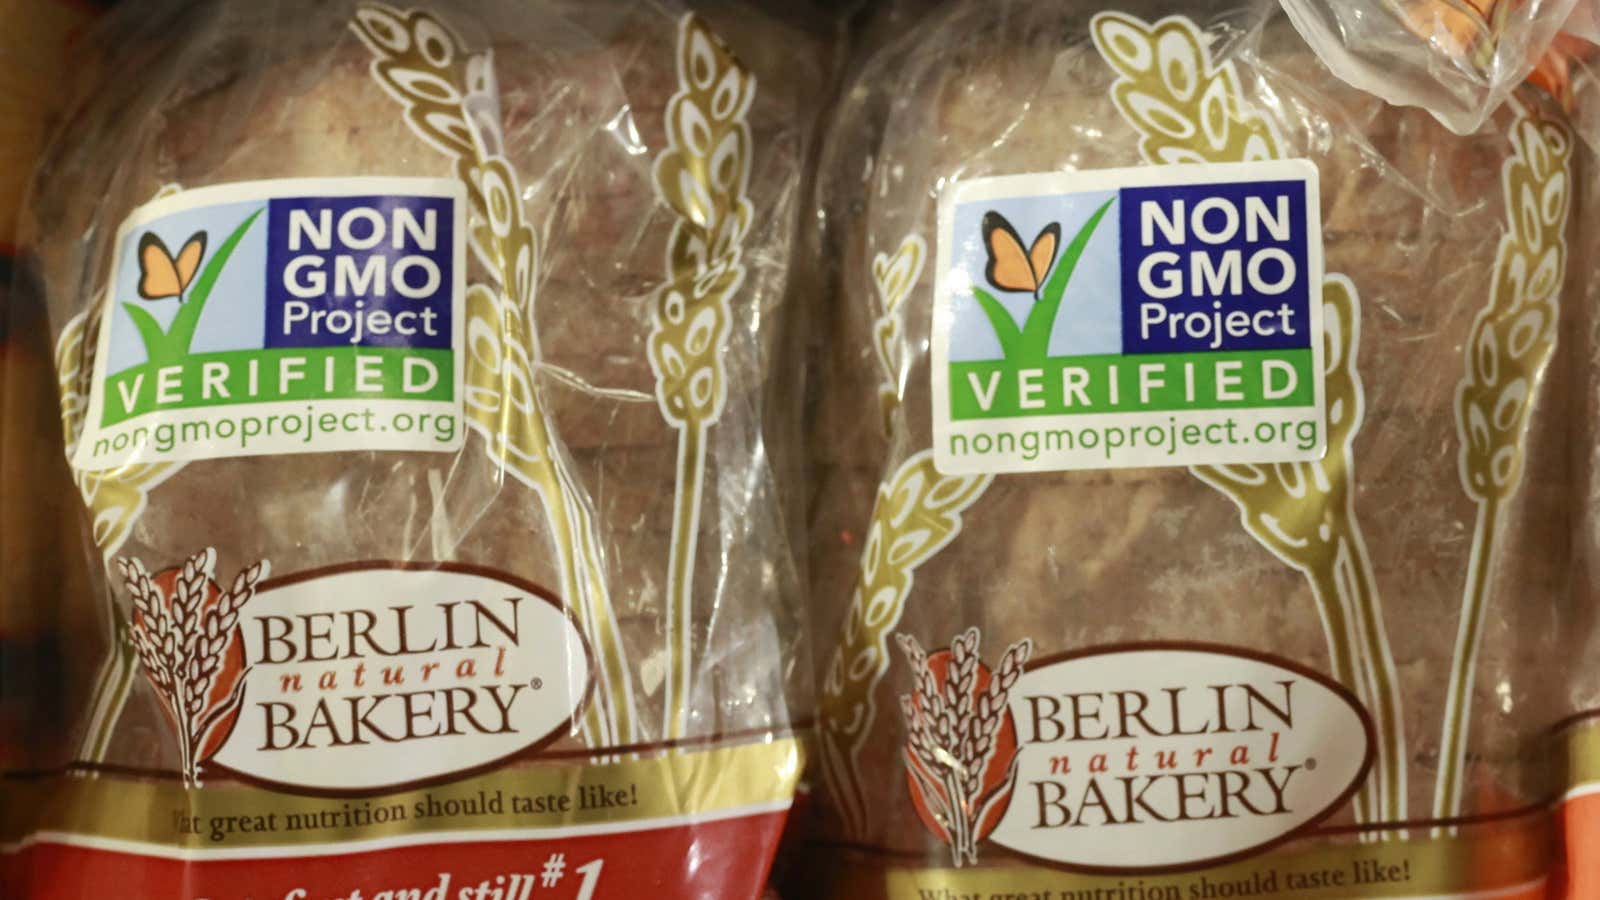 The government is going to take a closer look at GMOs